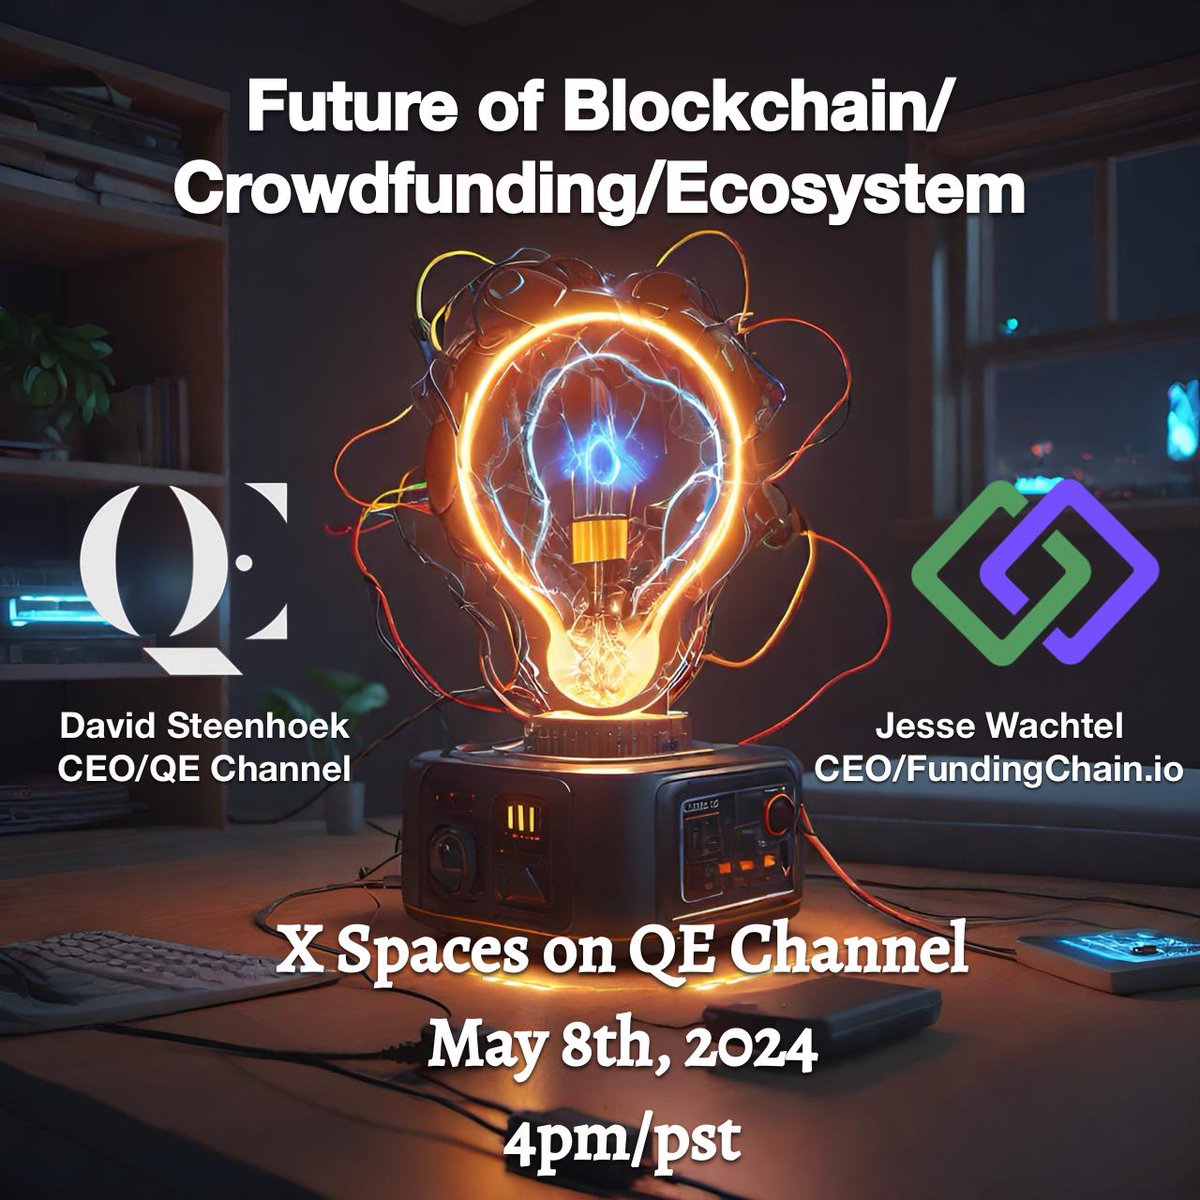 5% of the world uses Blockchain digital assets. We have only just begun. Future is now!

#blockchain #create #build #tech #questioneverything 

@QeChannel @qecoin @MediatorFilms @rullyjkusuma @BrendaaGilbert @VcVoid @MeatTracker @FundingChain @Rocketverse369 @Earth2Mars369